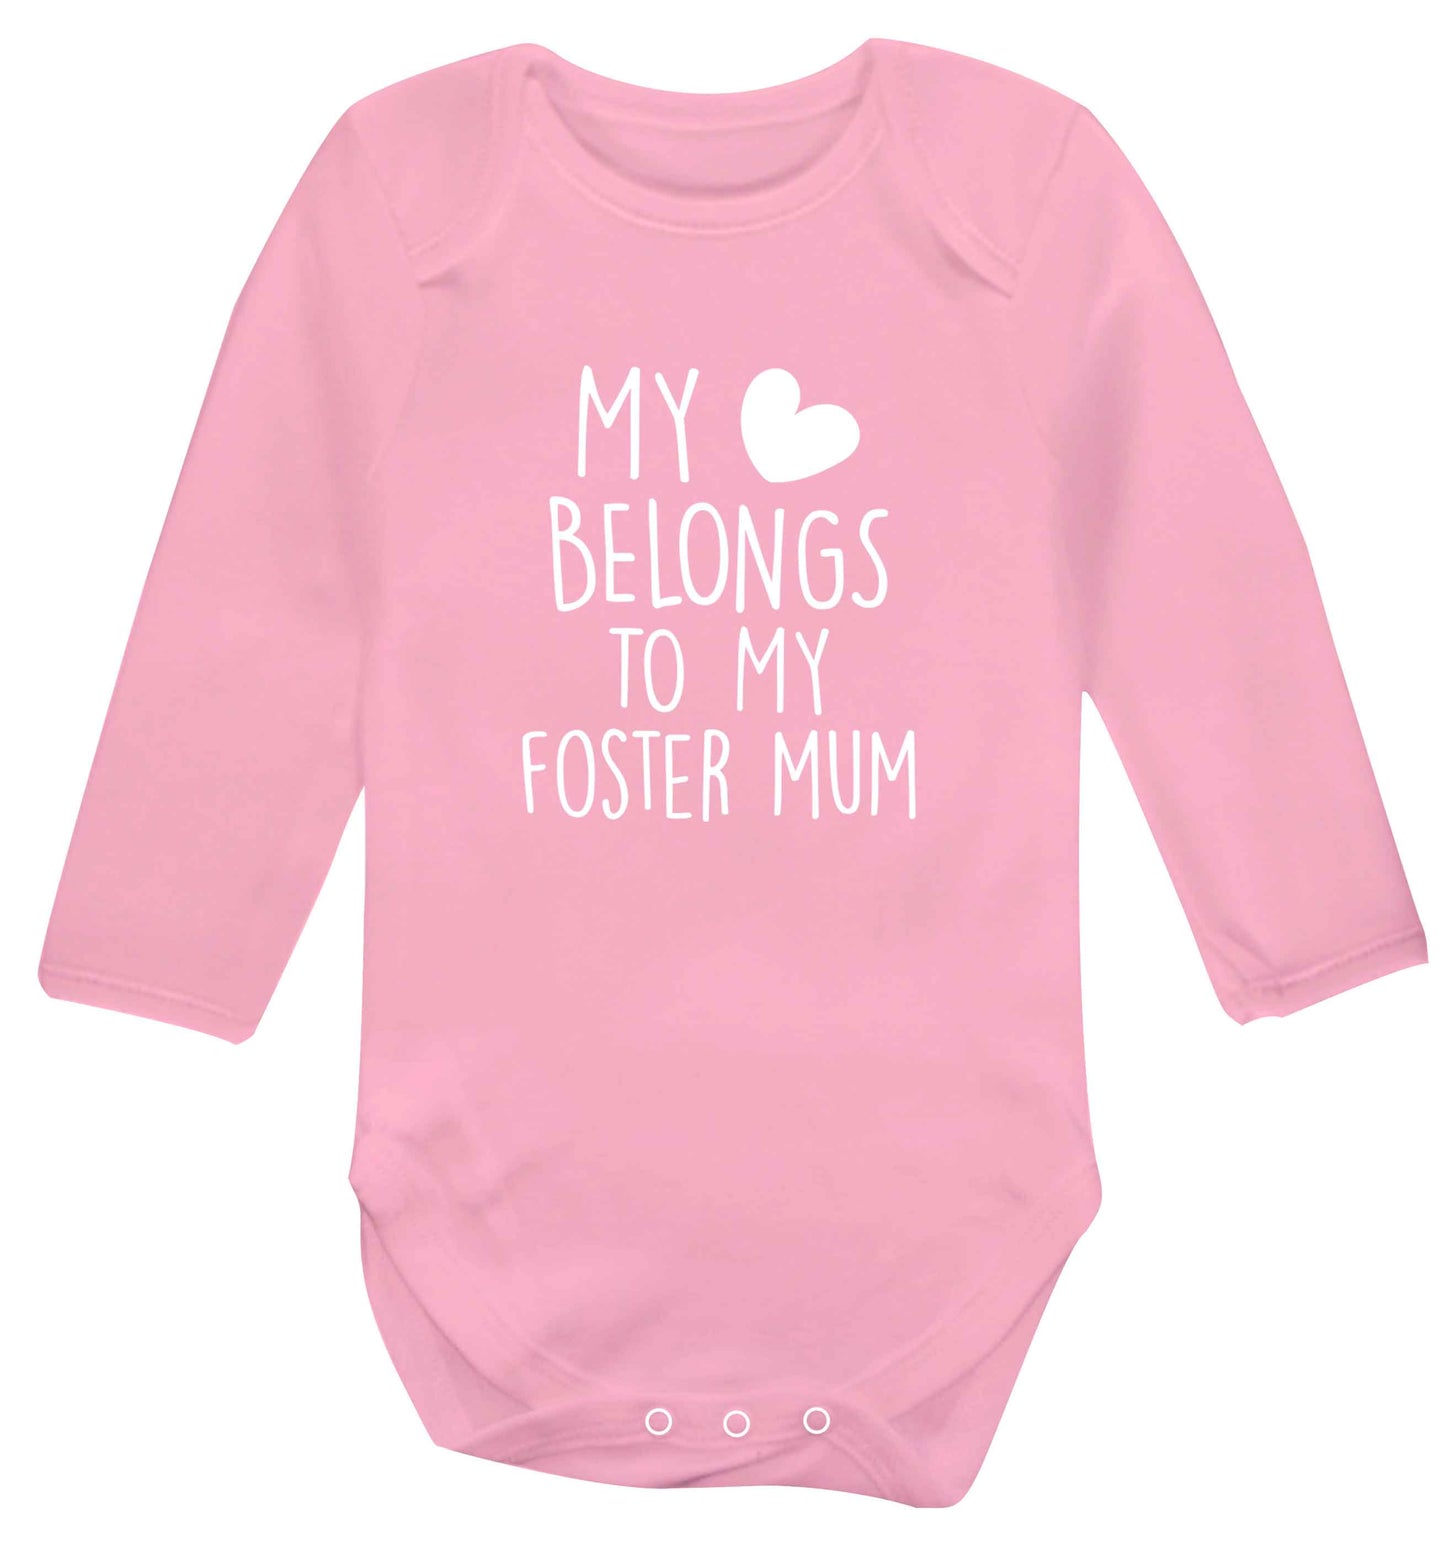 My heart belongs to my foster mum baby vest long sleeved pale pink 6-12 months